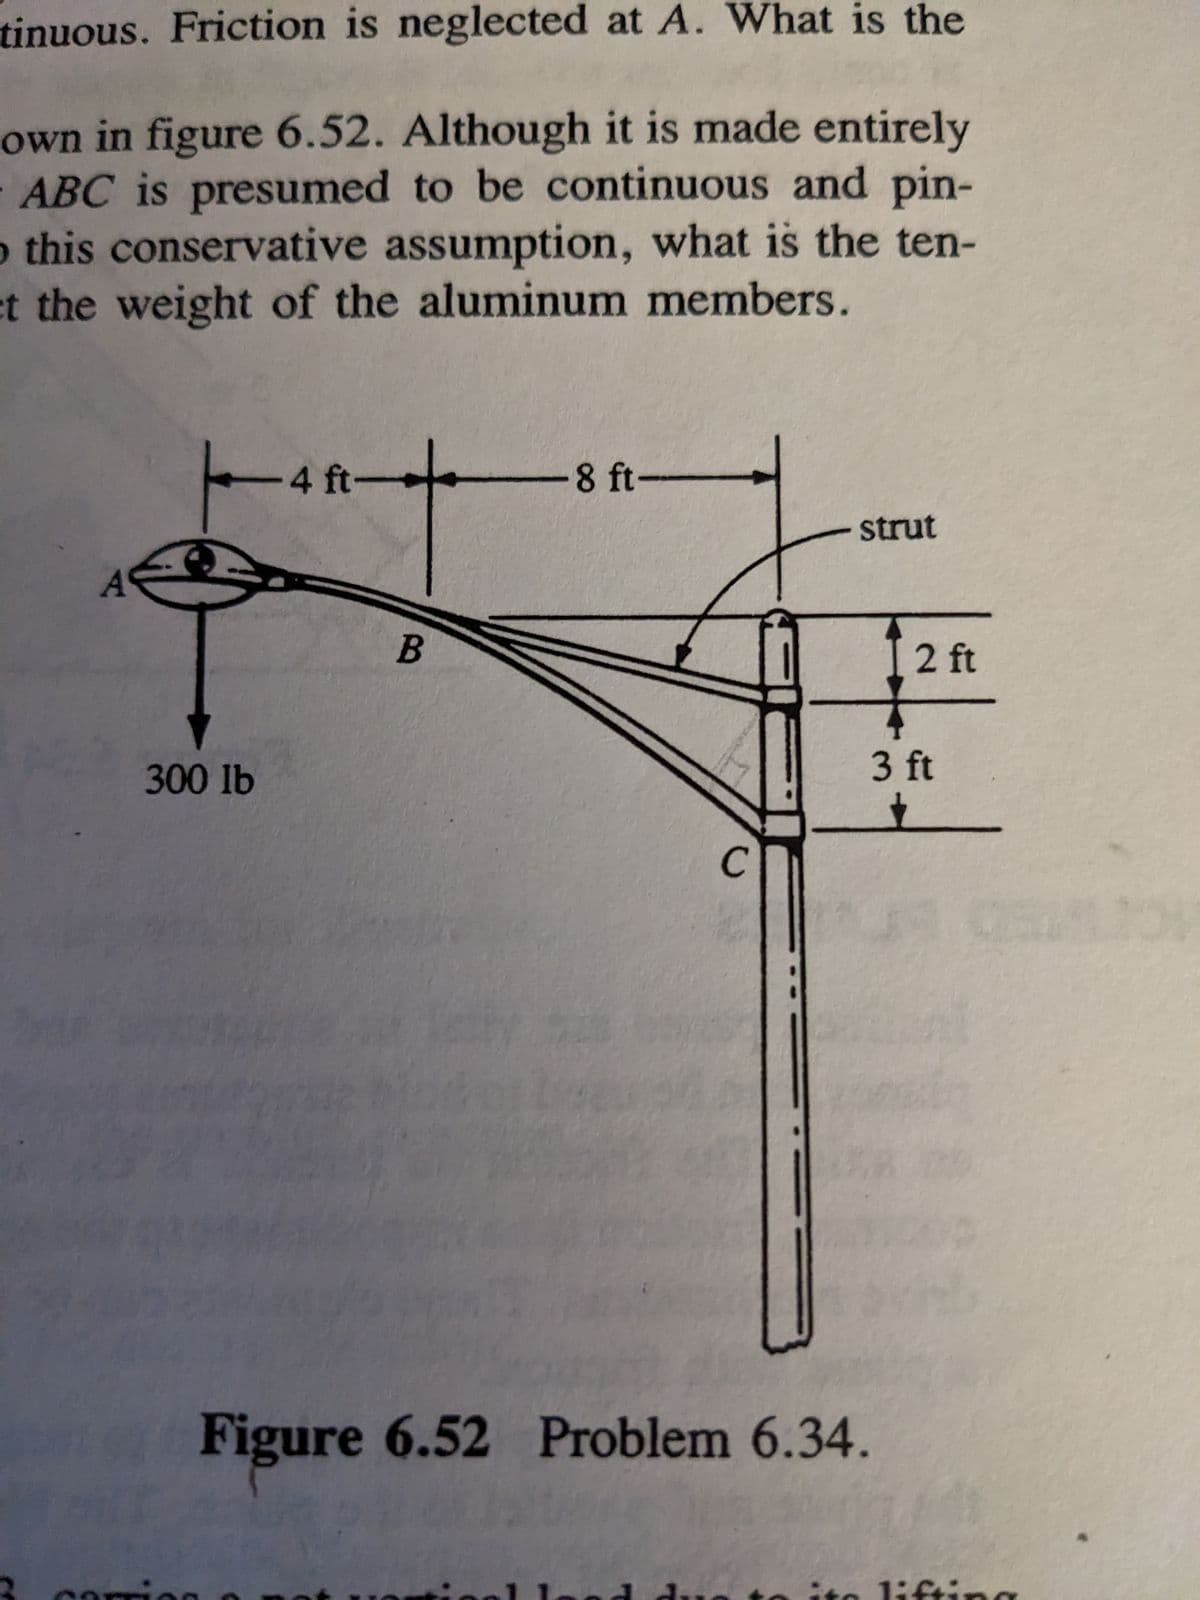 tinuous. Friction is neglected at A. What is the
own in figure 6.52. Although it is made entirely
ABC is presumed to be continuous and pin-
o this conservative assumption, what is the ten-
et the weight of the aluminum members.
F
300 lb
comi
-4 ft-
B
-8 ft-
C
strut
2 ft
3 ft
+
Figure 6.52 Problem 6.34.
lifting